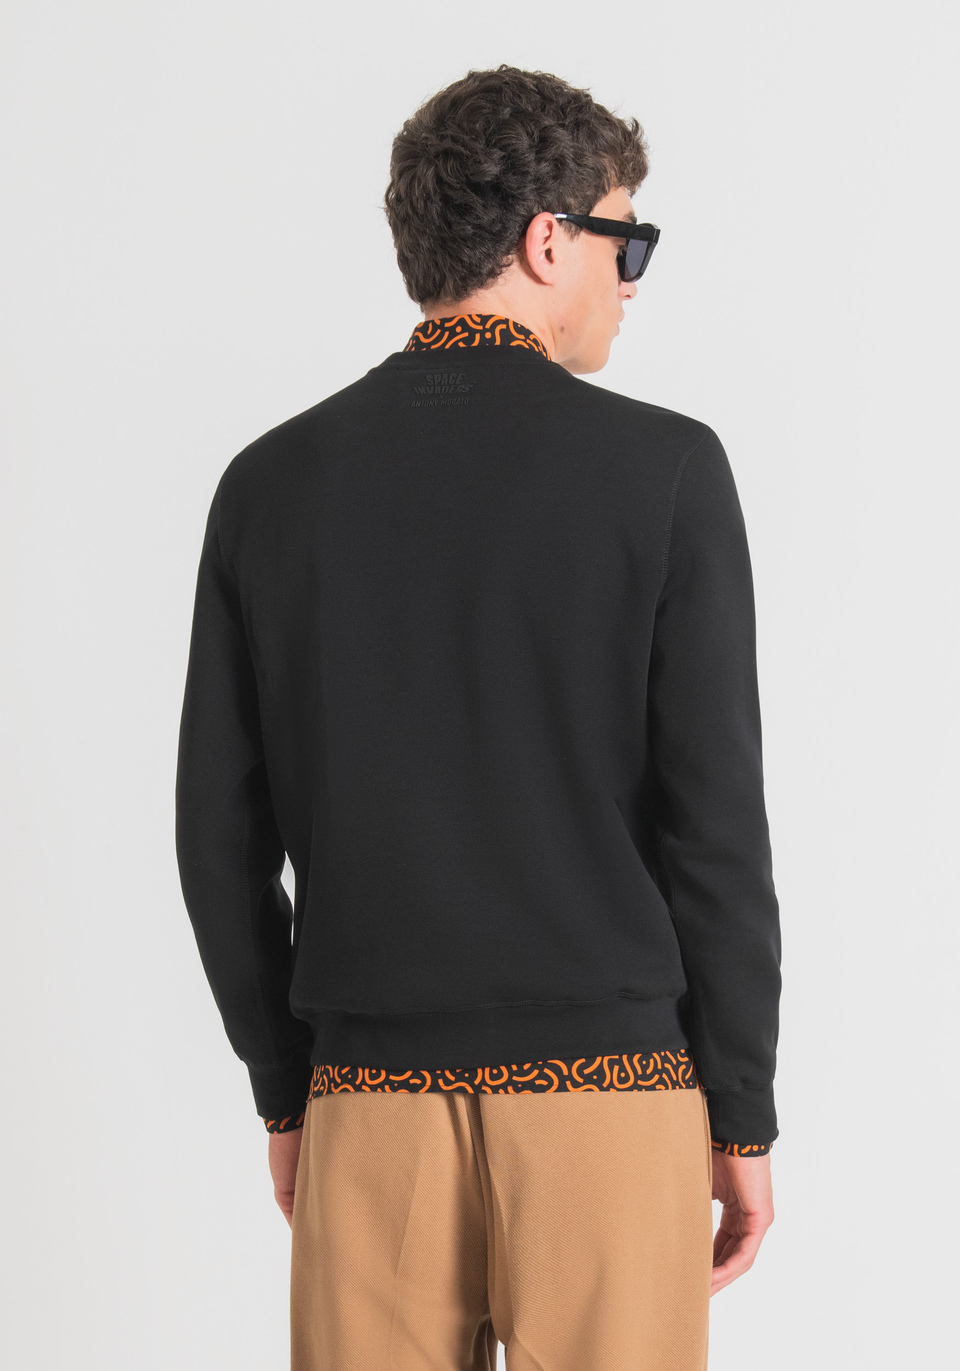 REGULAR FIT SWEATSHIRT IN SOFT COTTON BLEND WITH SPACE INVADERS PRINT - Antony Morato Online Shop